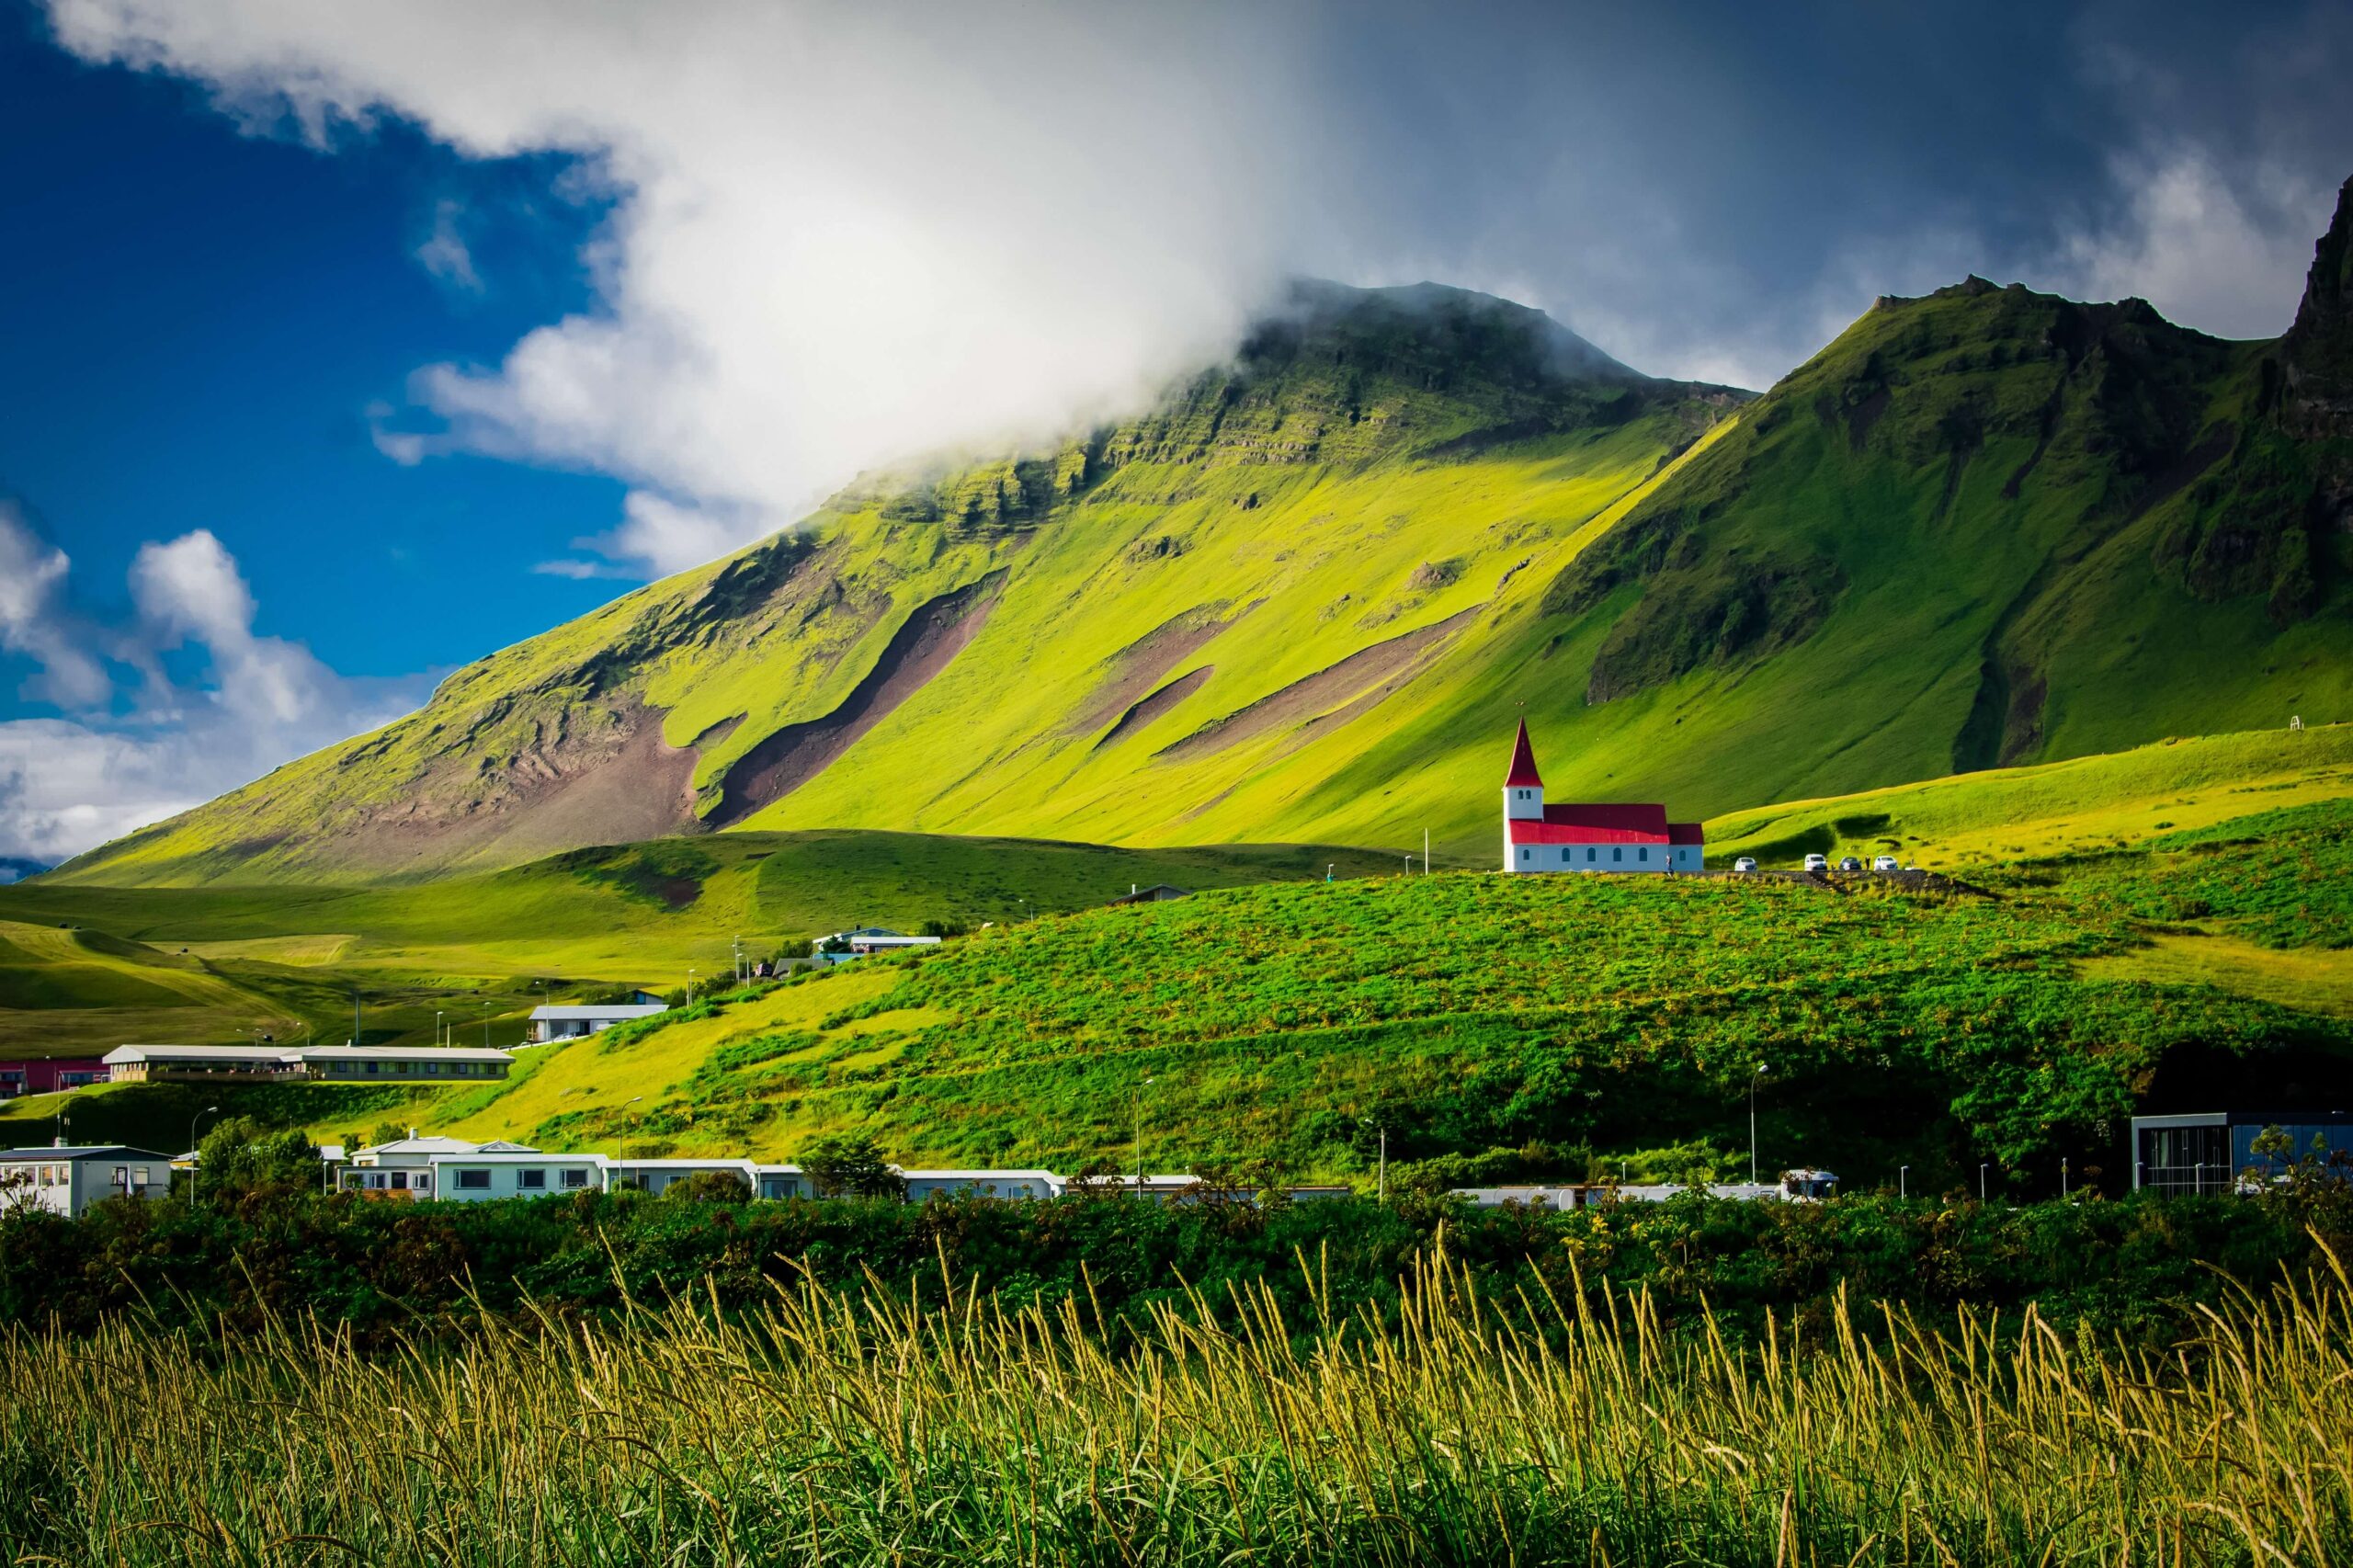 Your solo trip of a lifetime in Iceland awaits you. Check out the views in .Summer: courtesy of pexels | rudolf kirchner